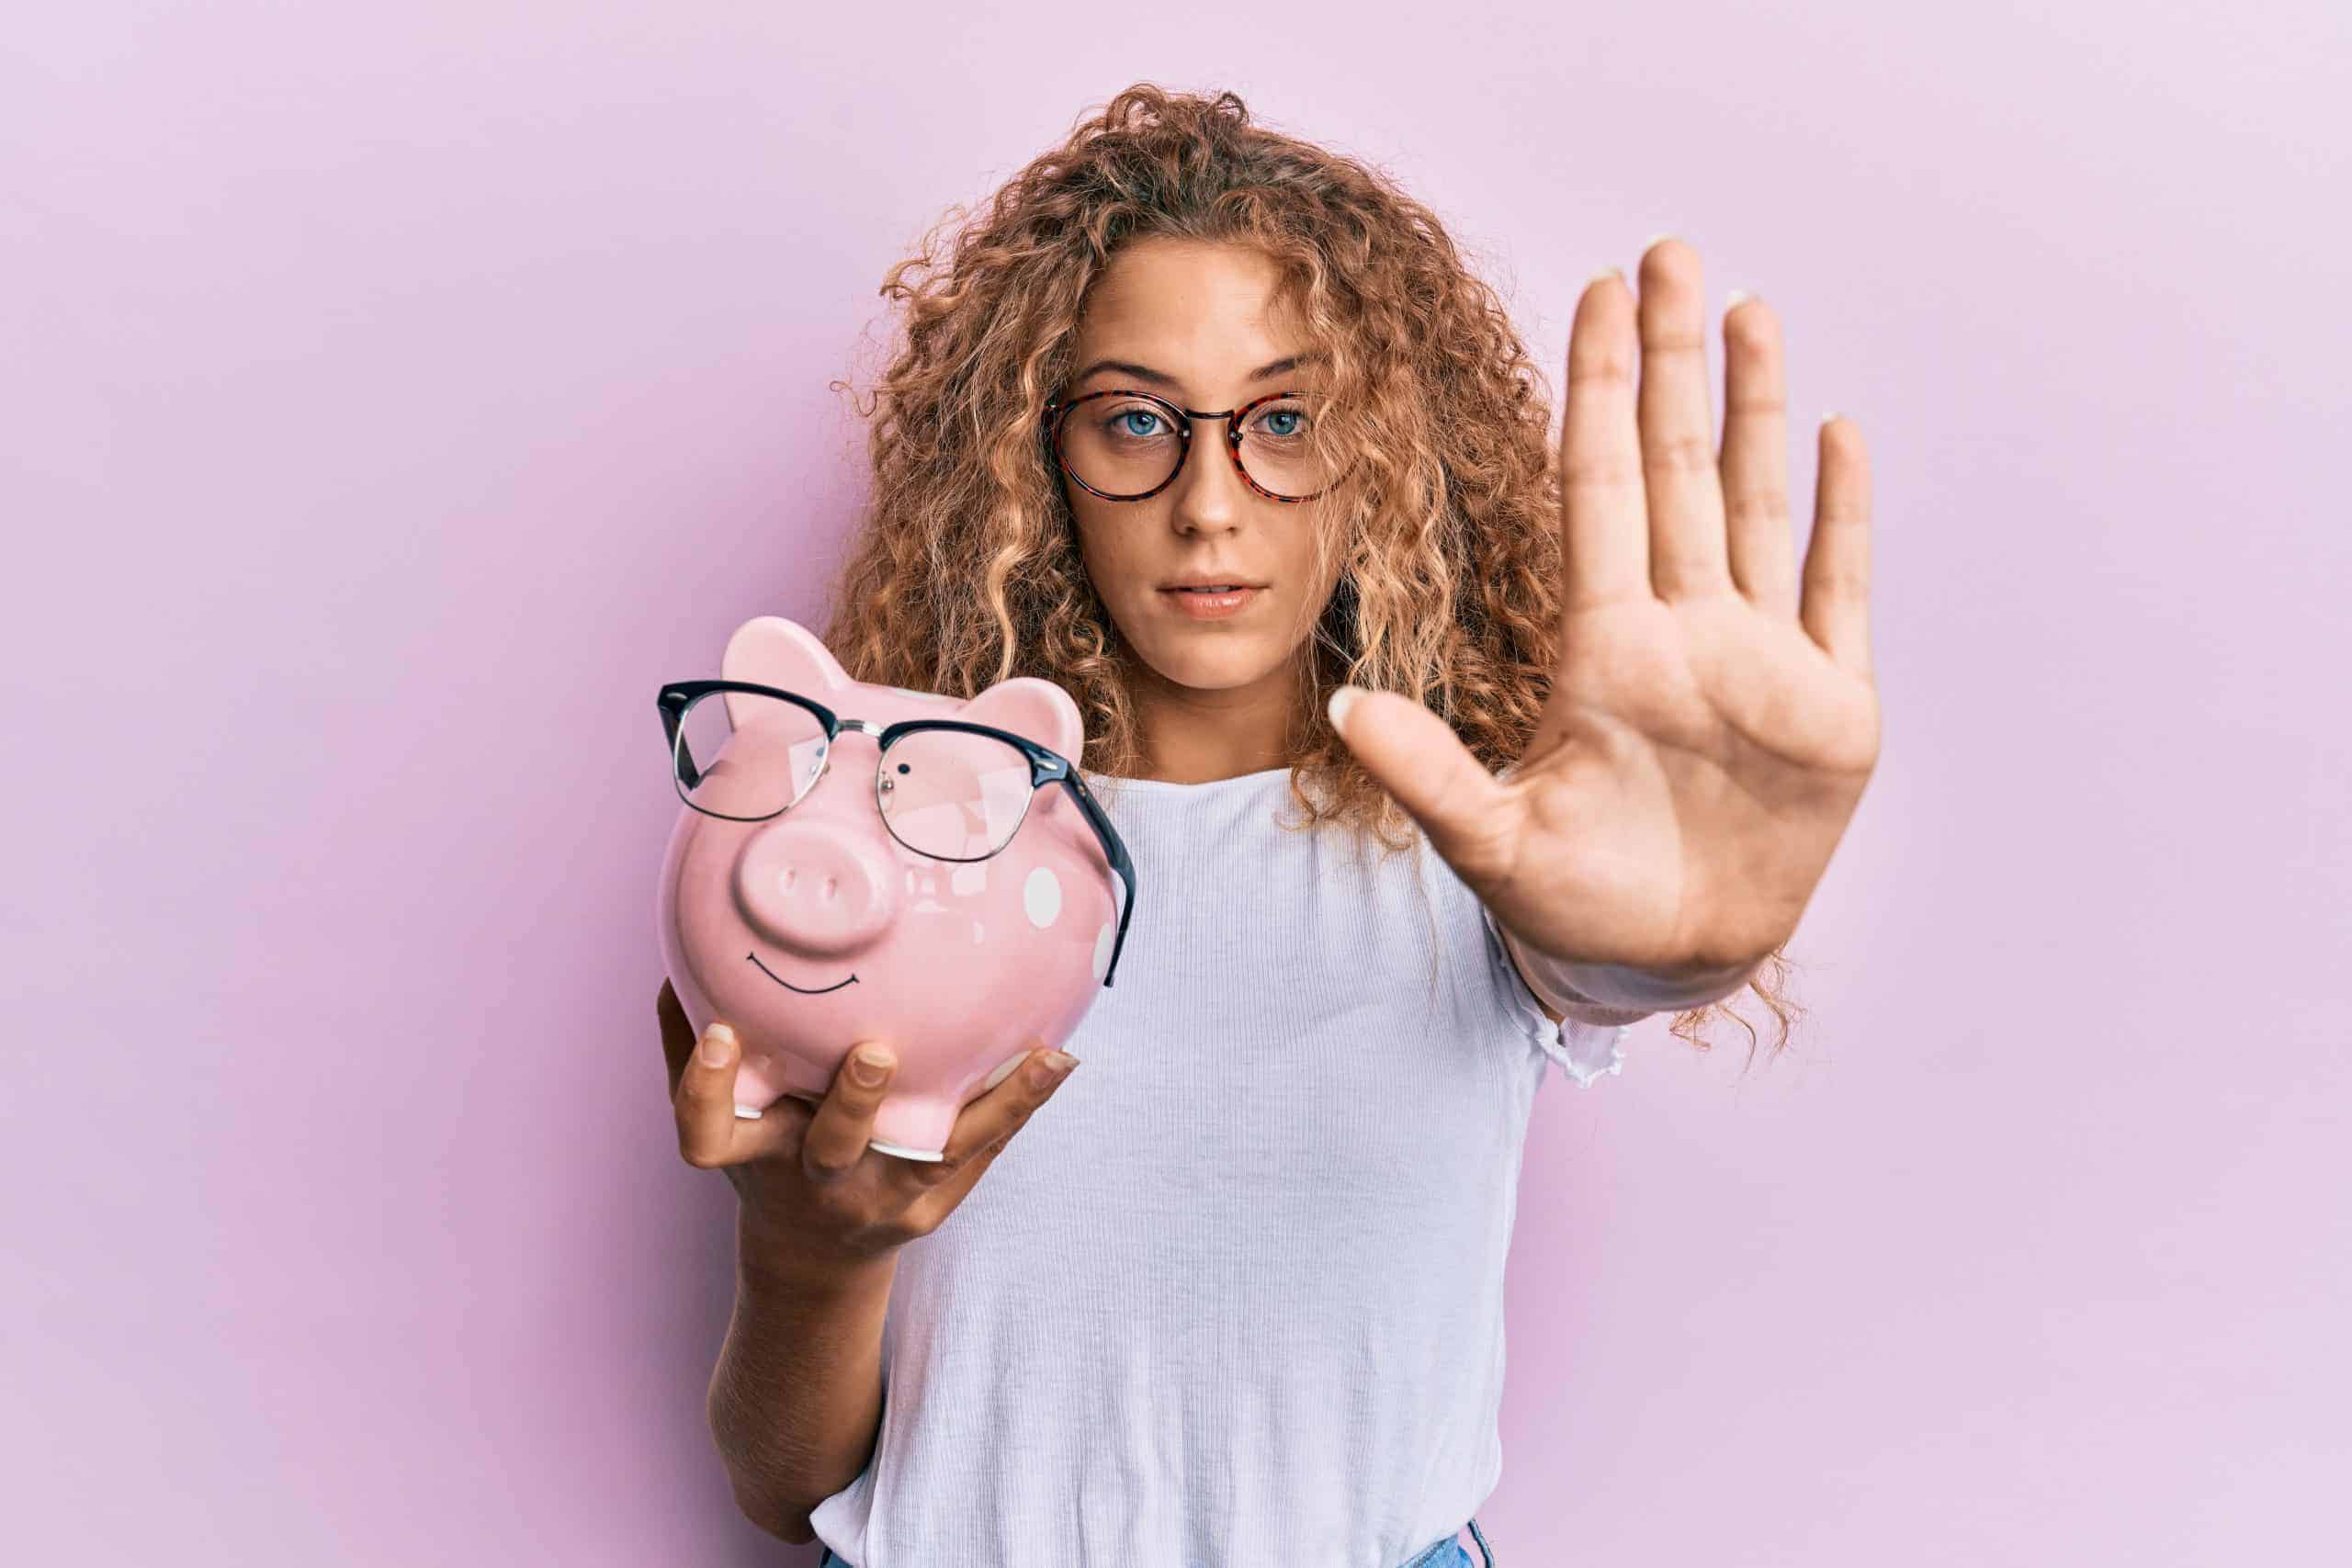 No spend month challenge - Woman holding piggy bank signaling stop